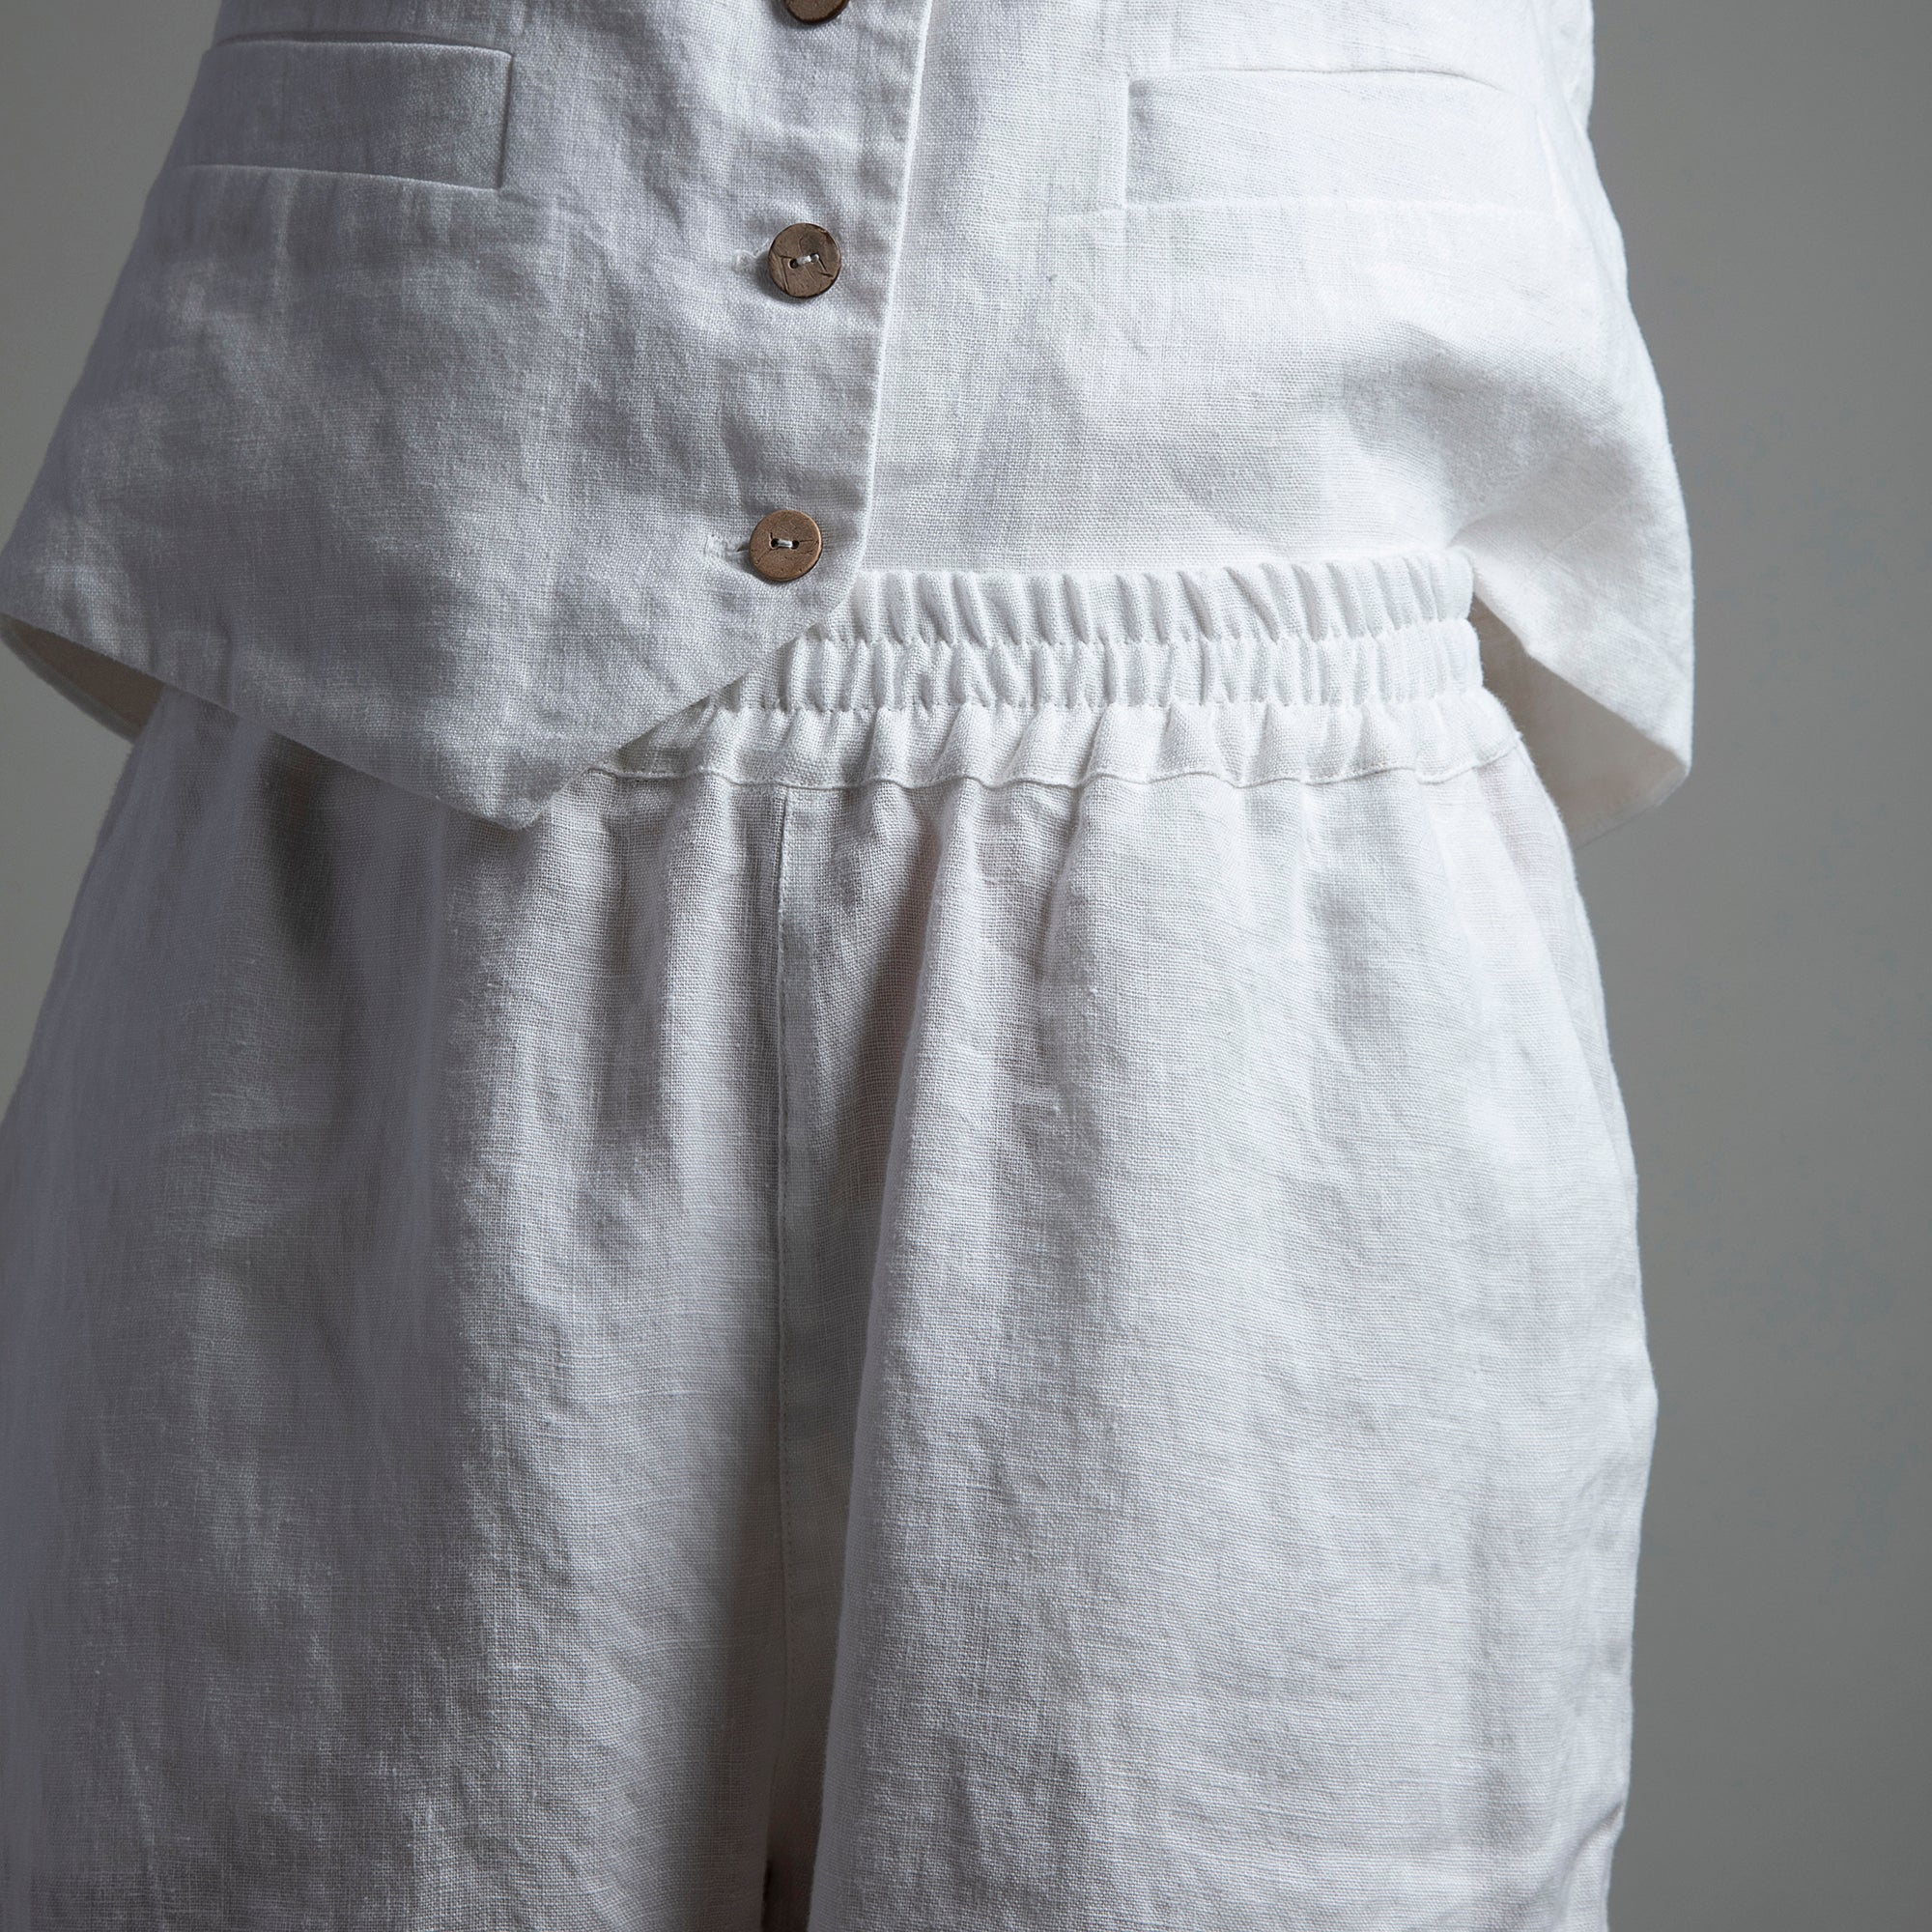 RELAX Tapered Ankle Linen Pants